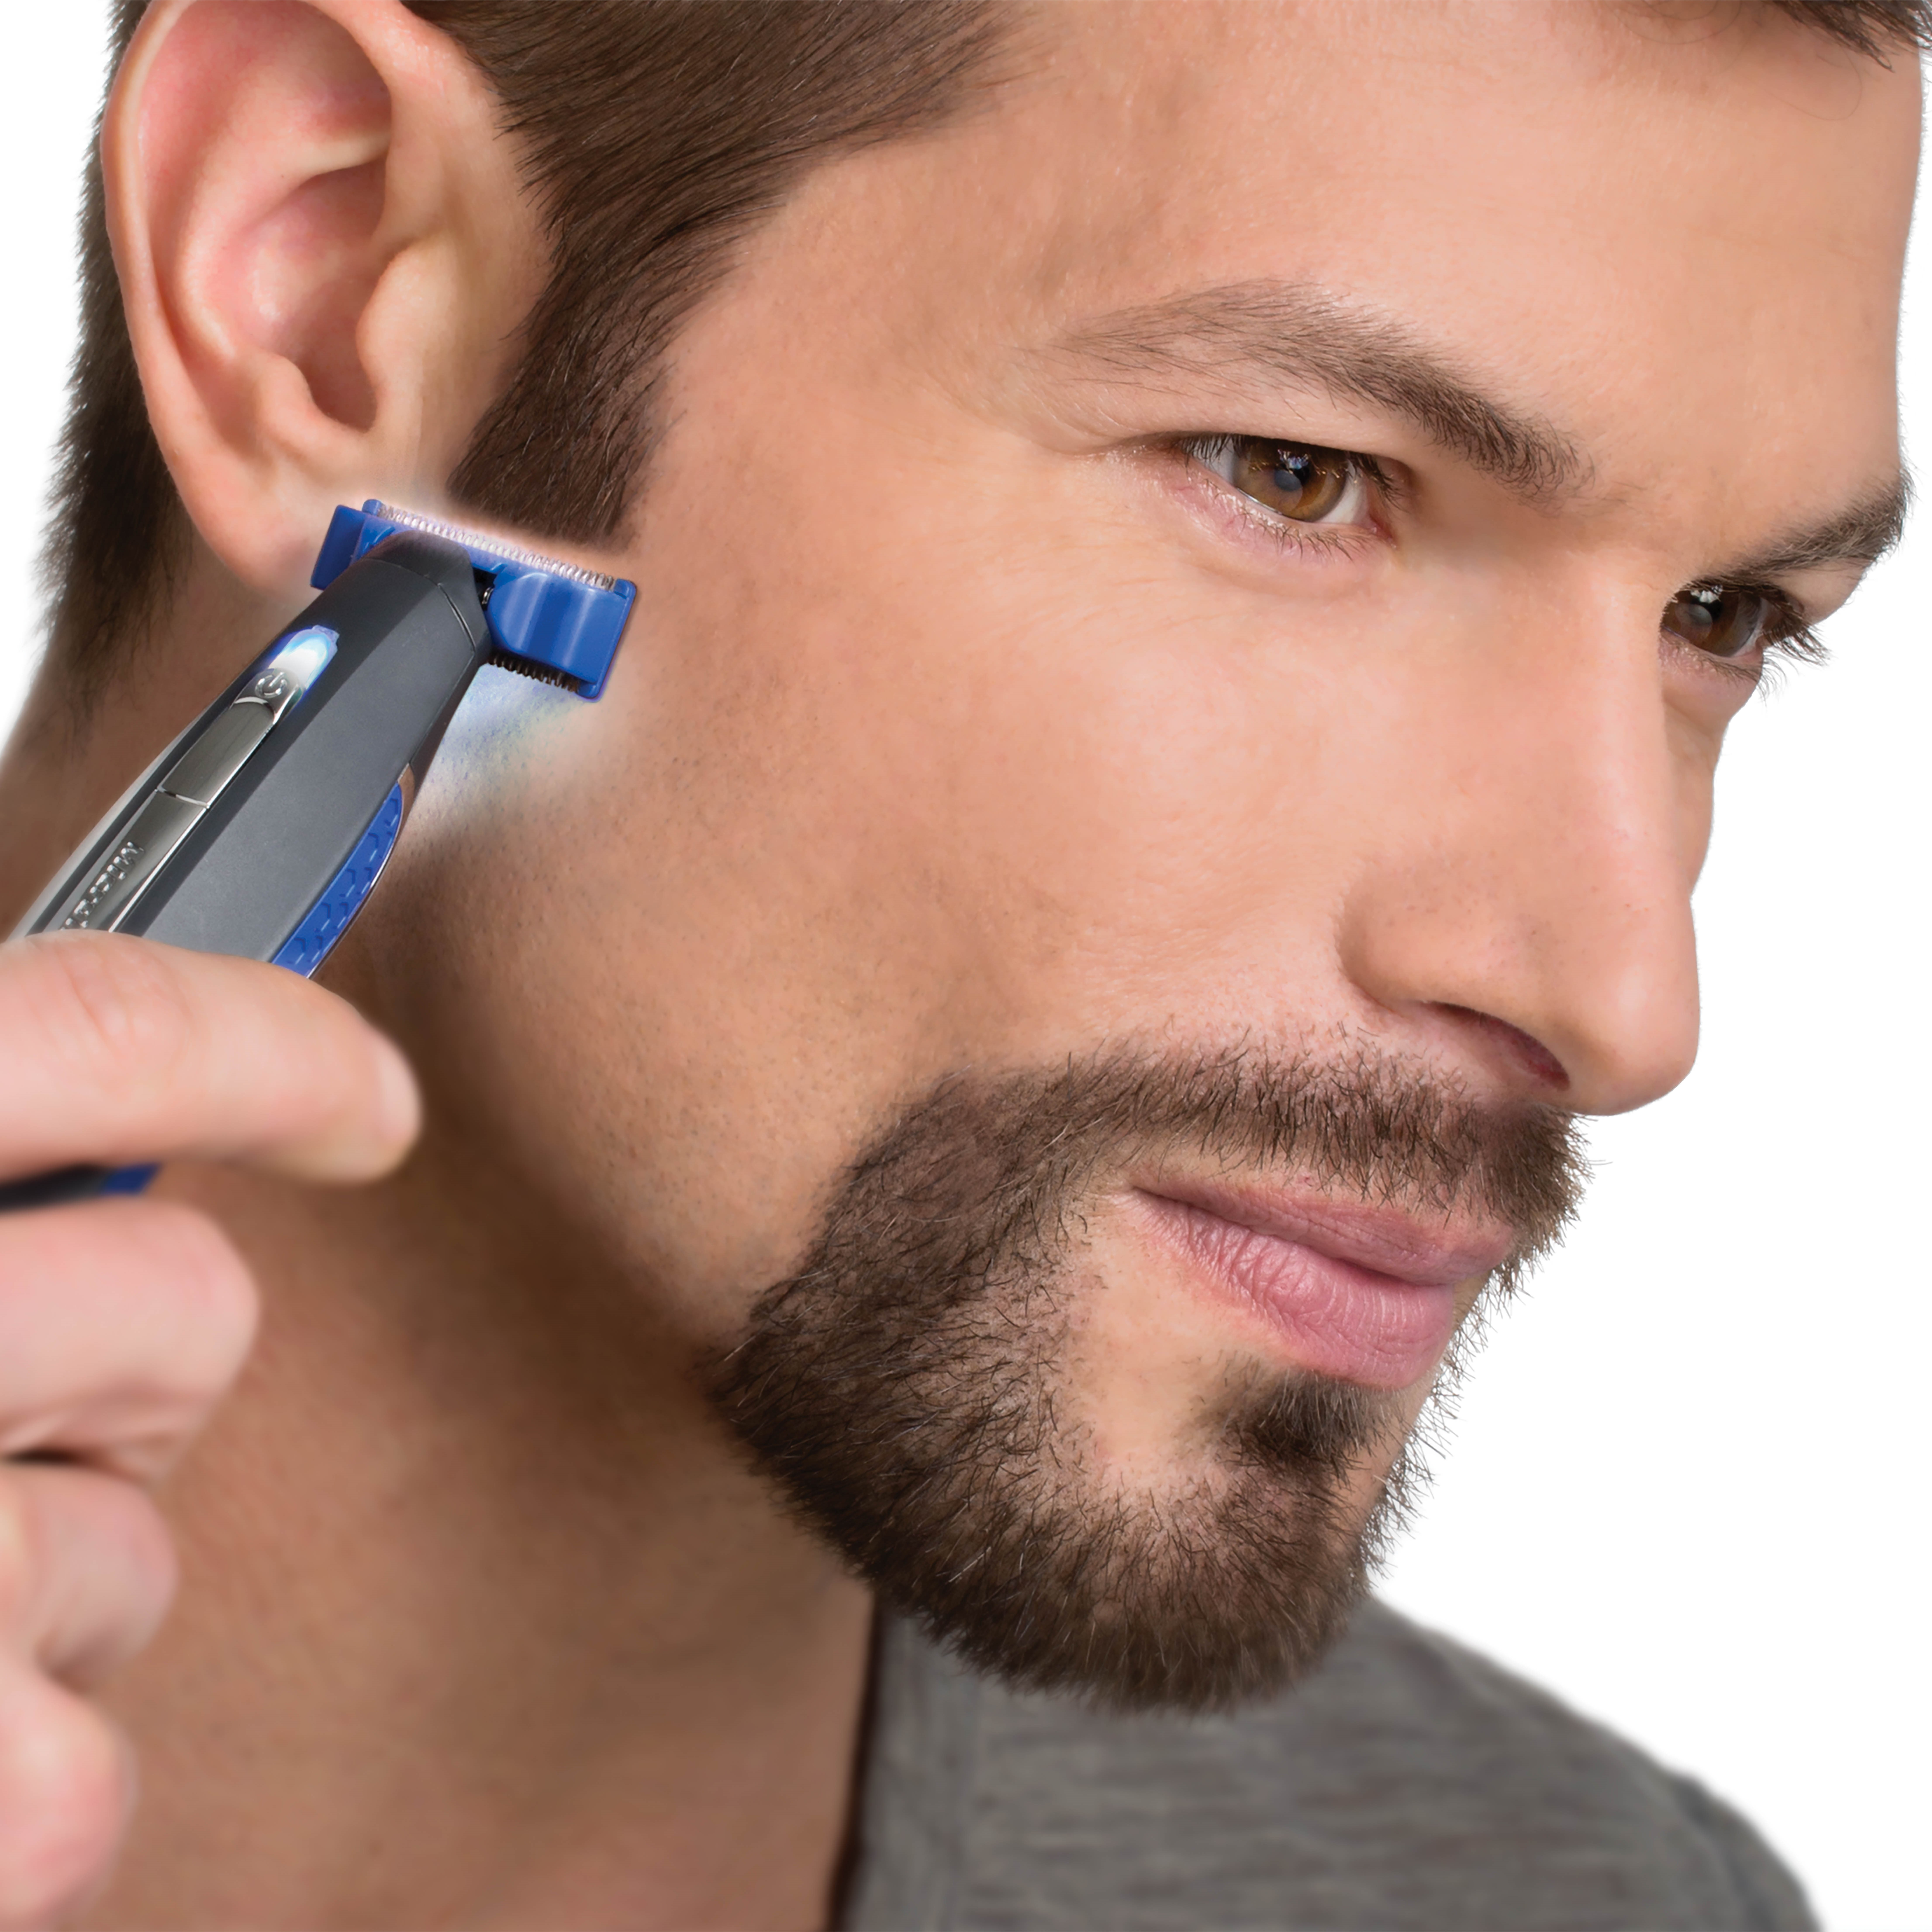 Microtouch Solo Beard Trimmer - Beard Trimmer Trims, Edges, and Shaves All In One! - image 5 of 7